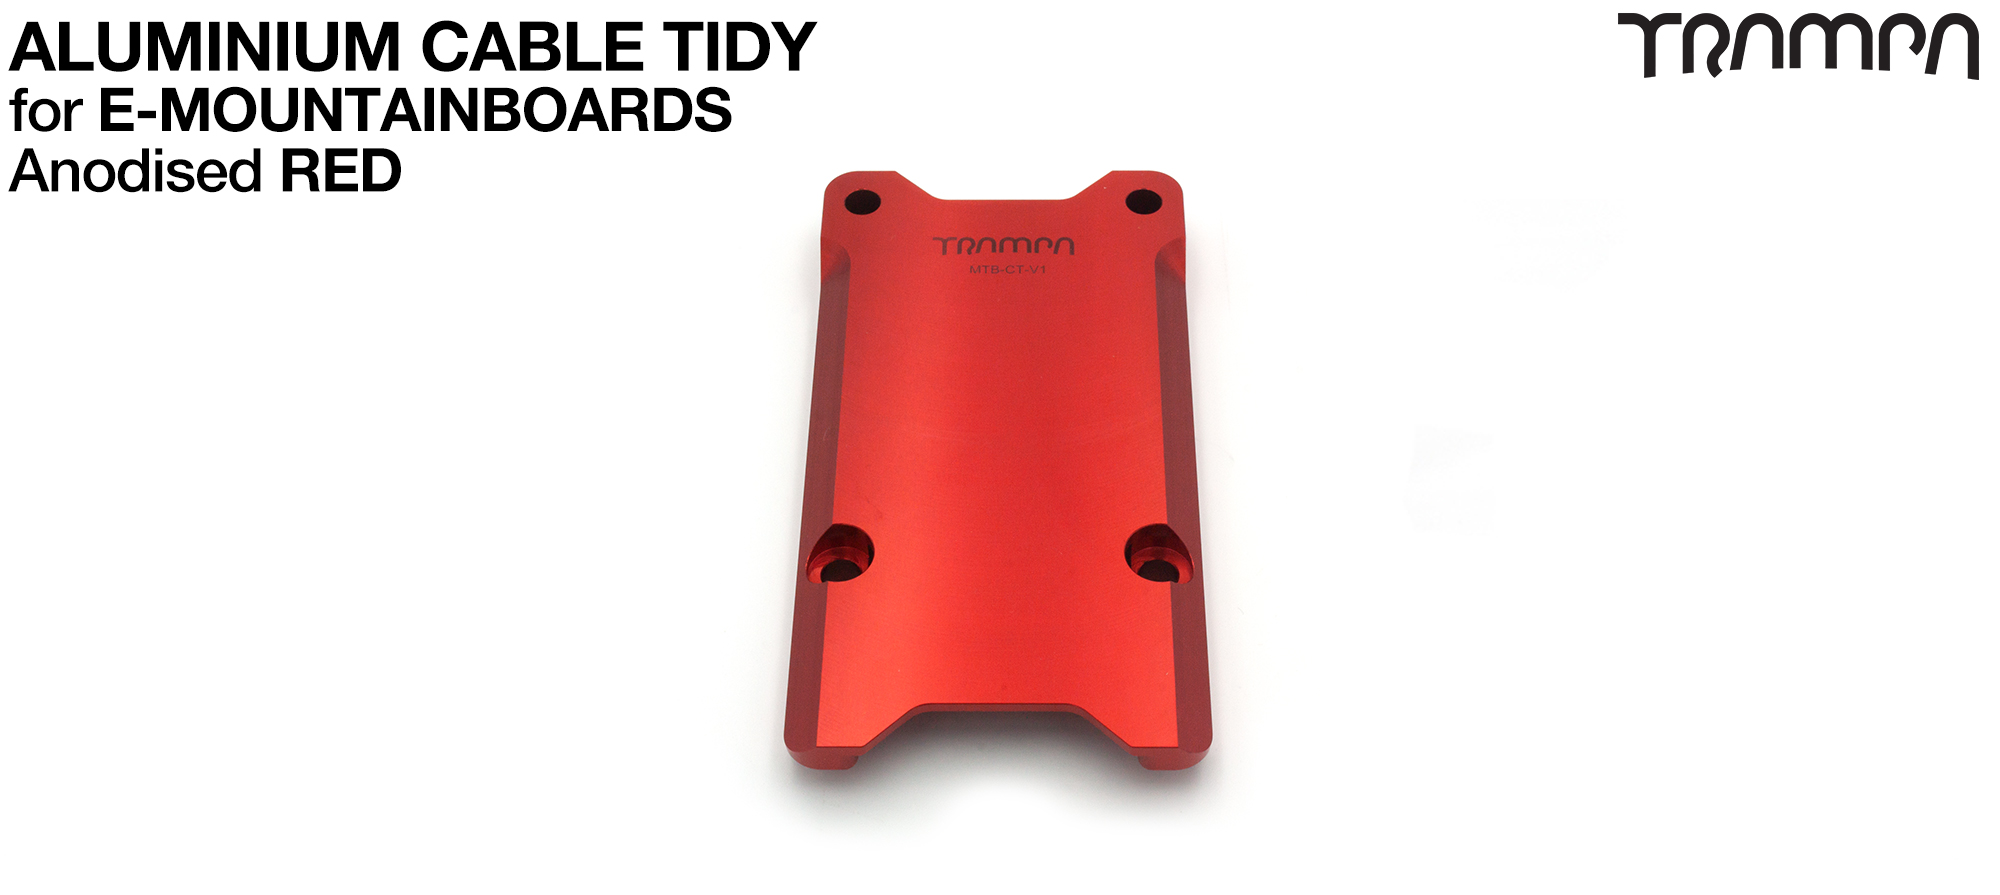 Anodised Aluminum Cable Tidy - RED